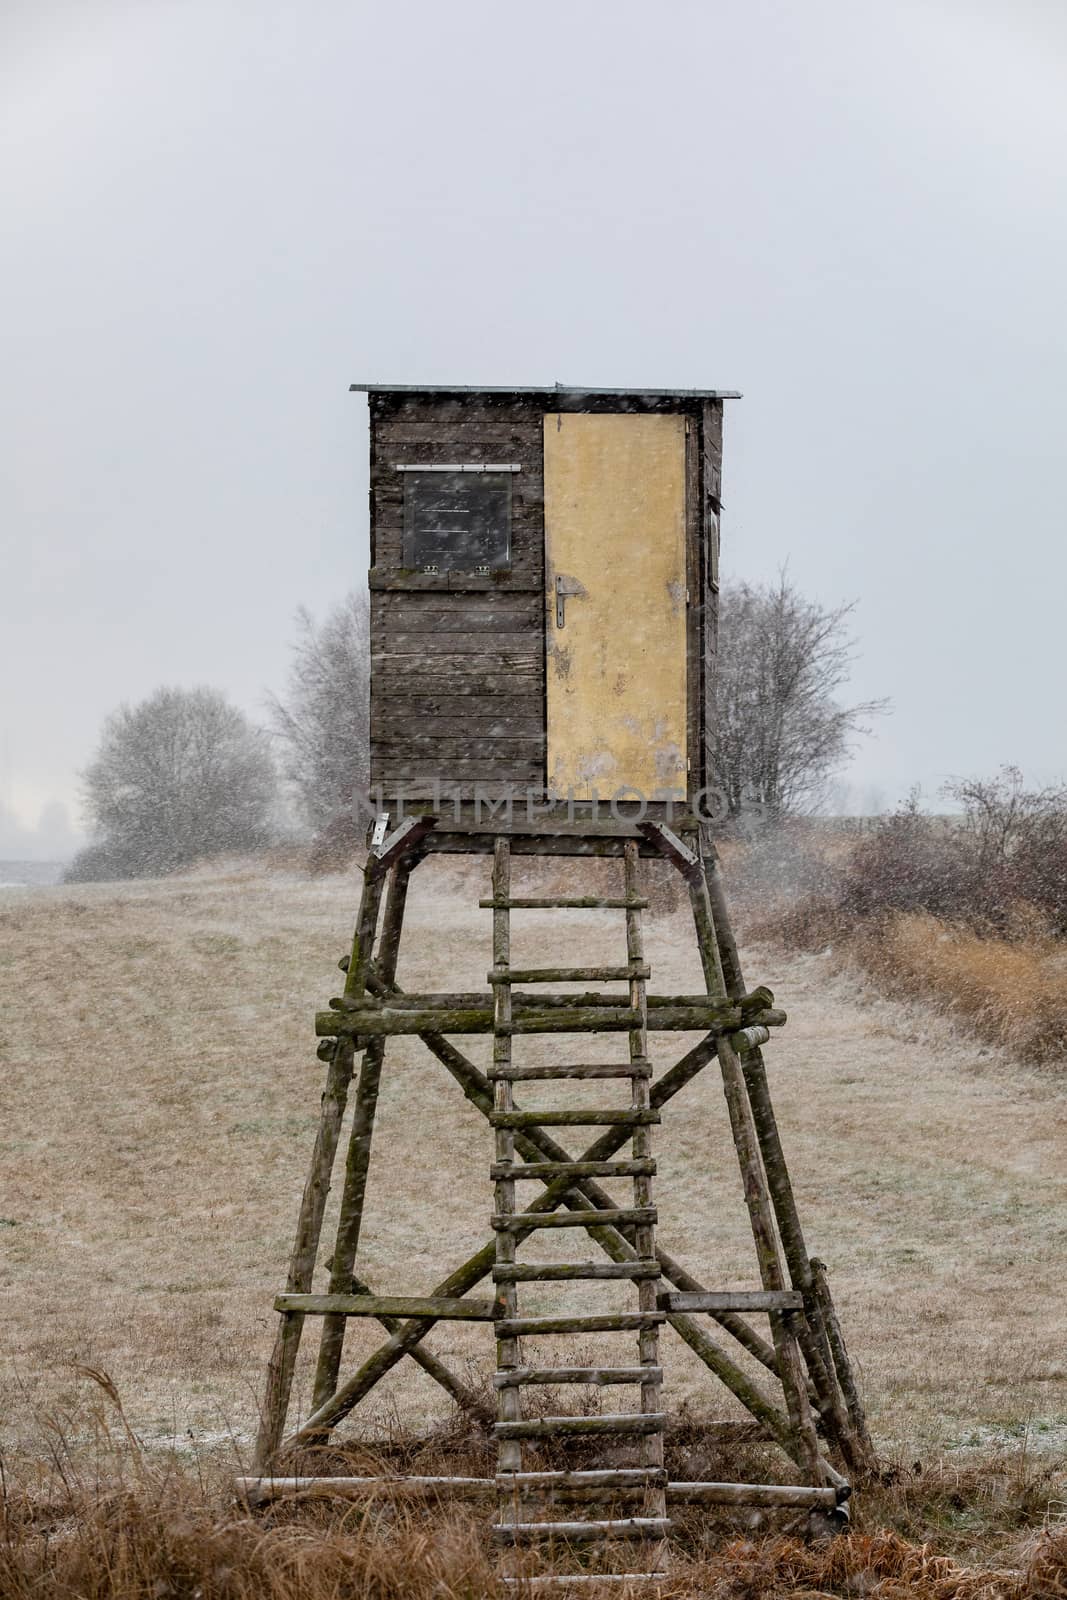 Wooden Hunters hunting tower in winter with snowfall, countryside landscape, Czech Republic, European Scenery